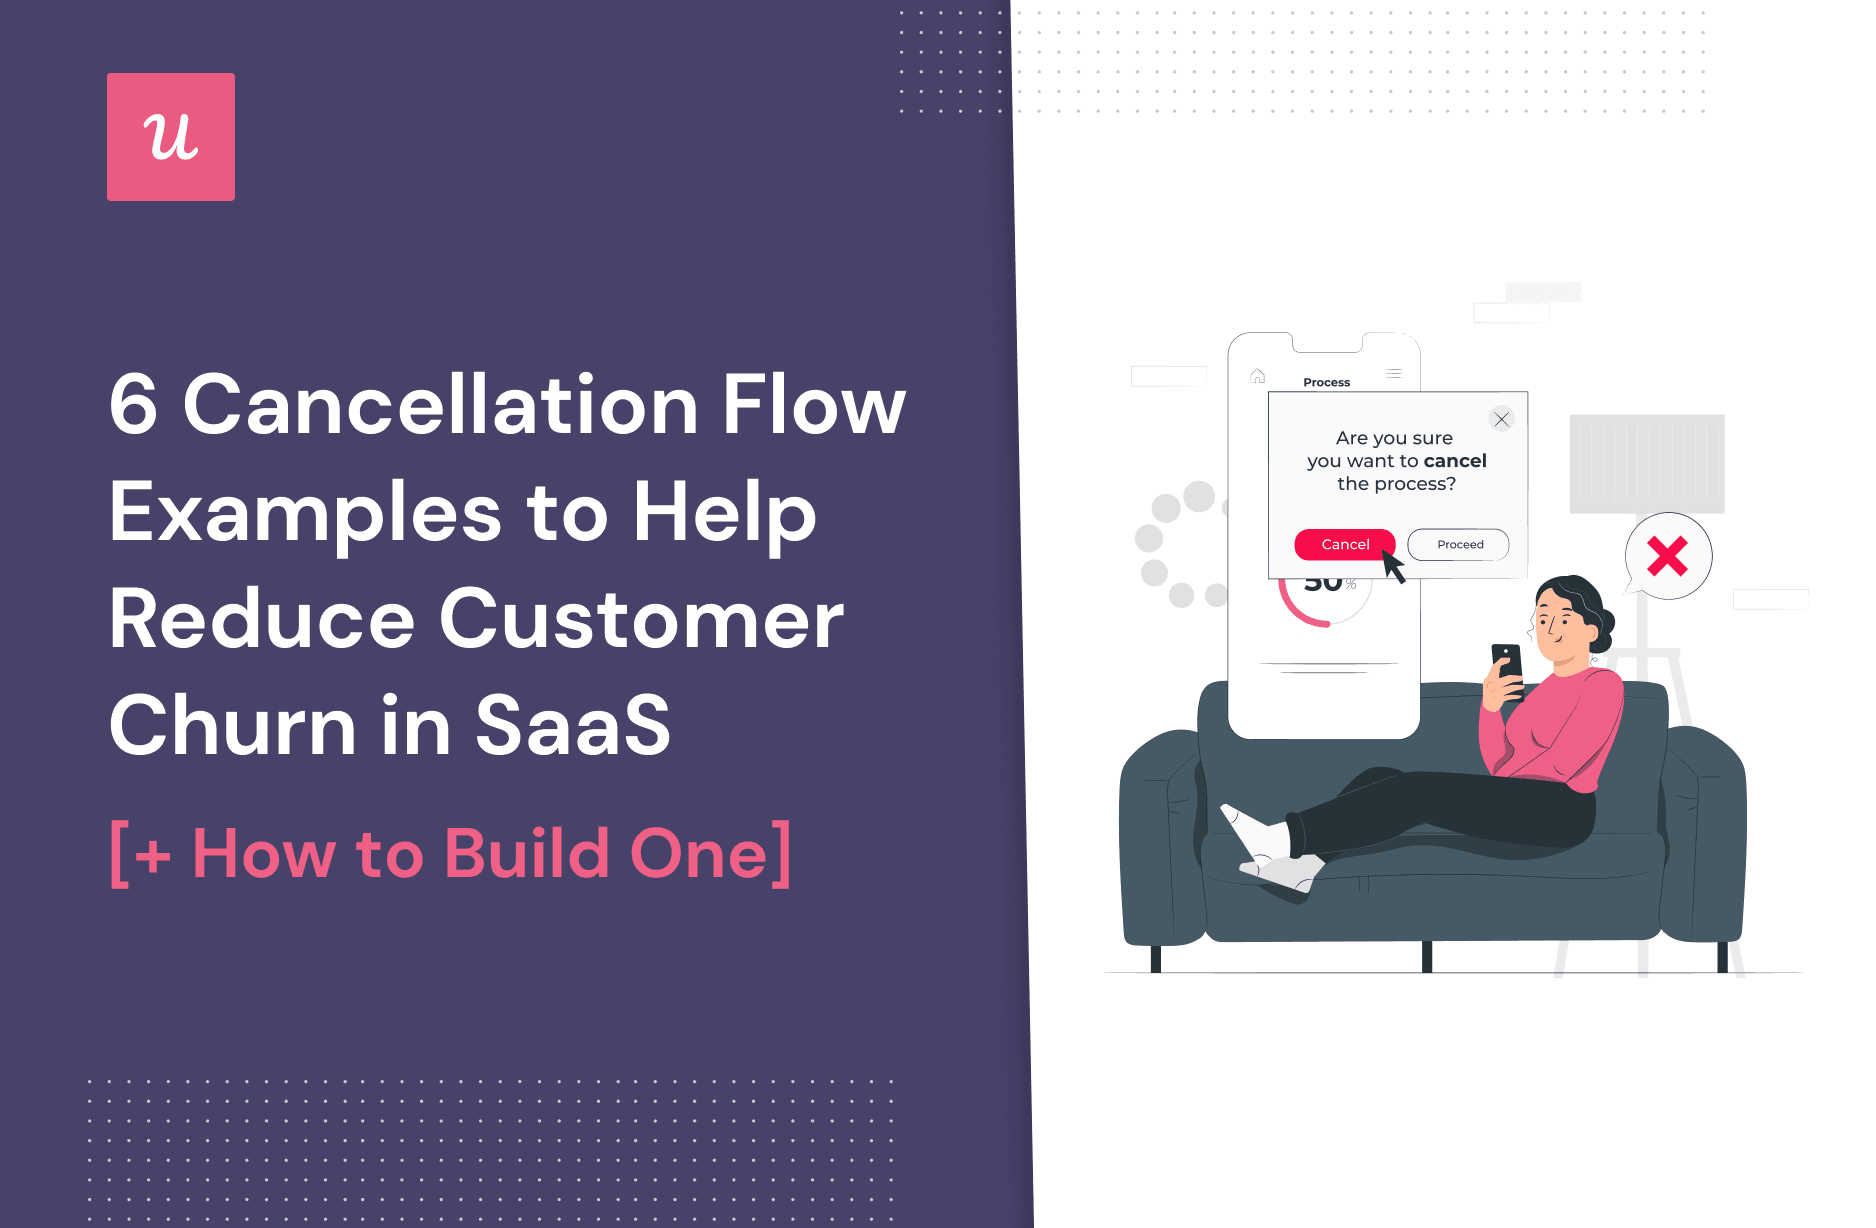 6 Cancellation Flow Examples To Help Reduce Customer Churn in SaaS [+How to Build One] cover